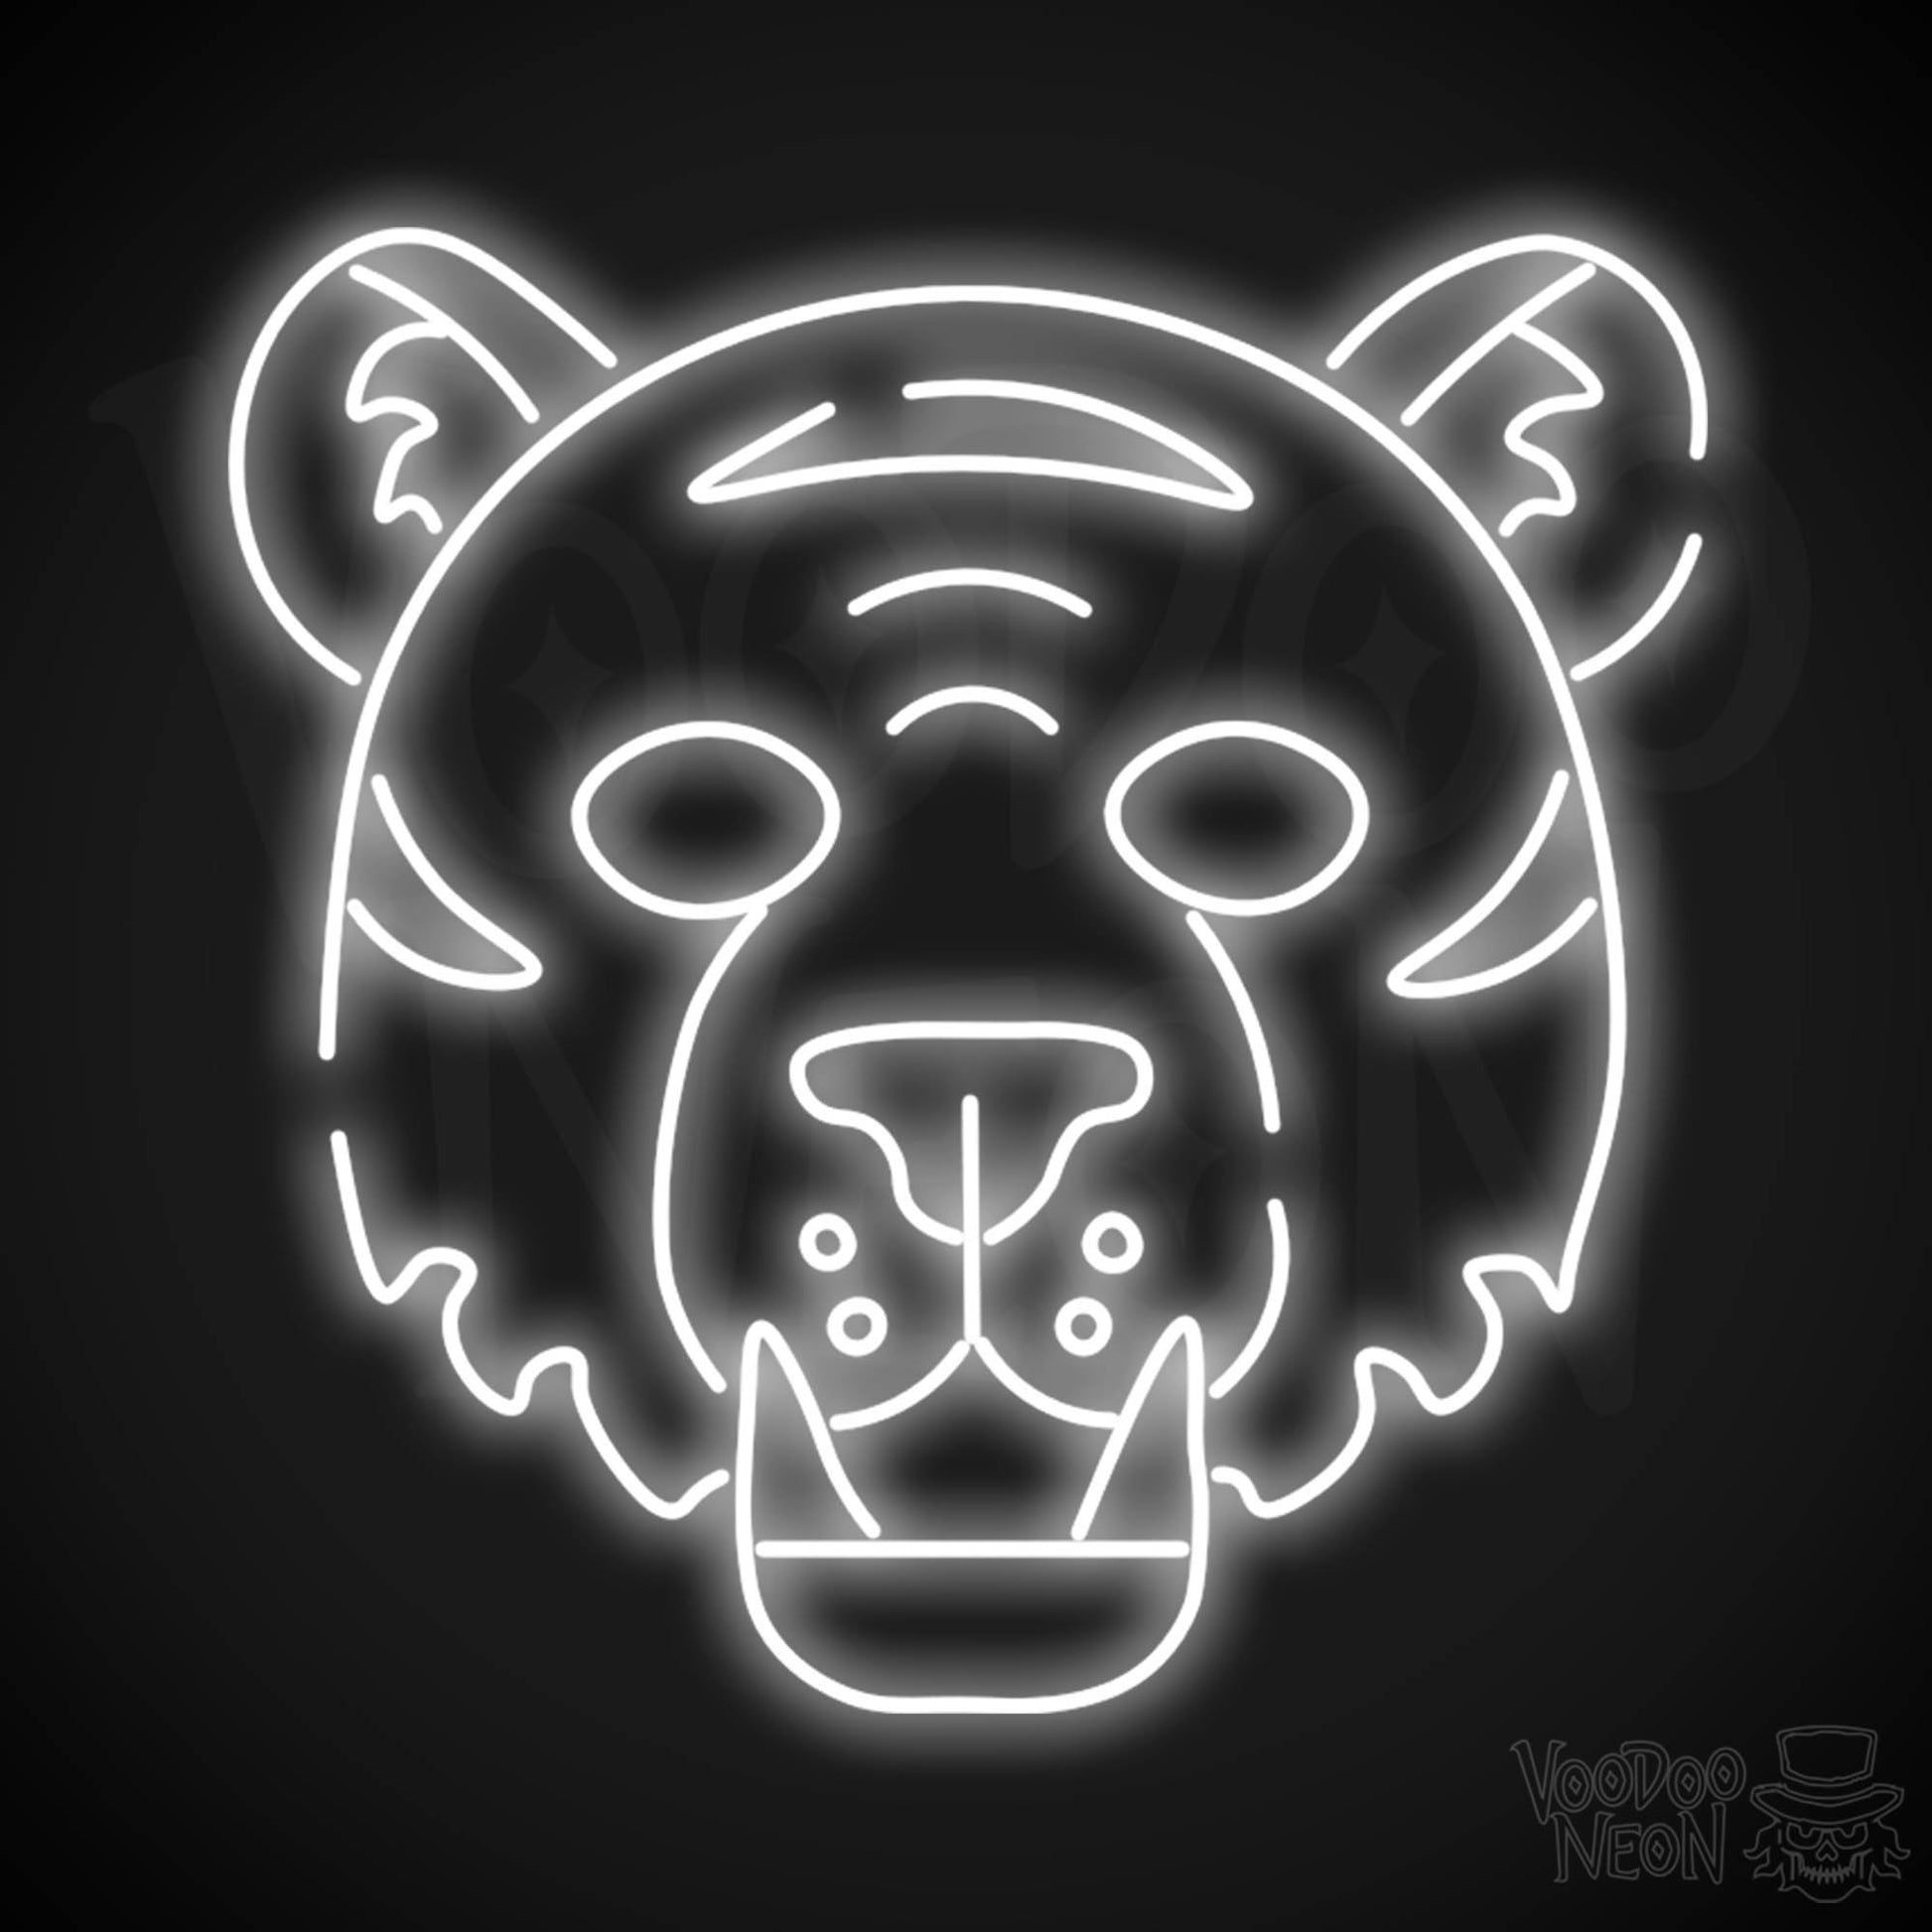 Neon Tiger Wall Art - Neon Tiger Sign - Tiger Neon Sign - LED Sign - Color White